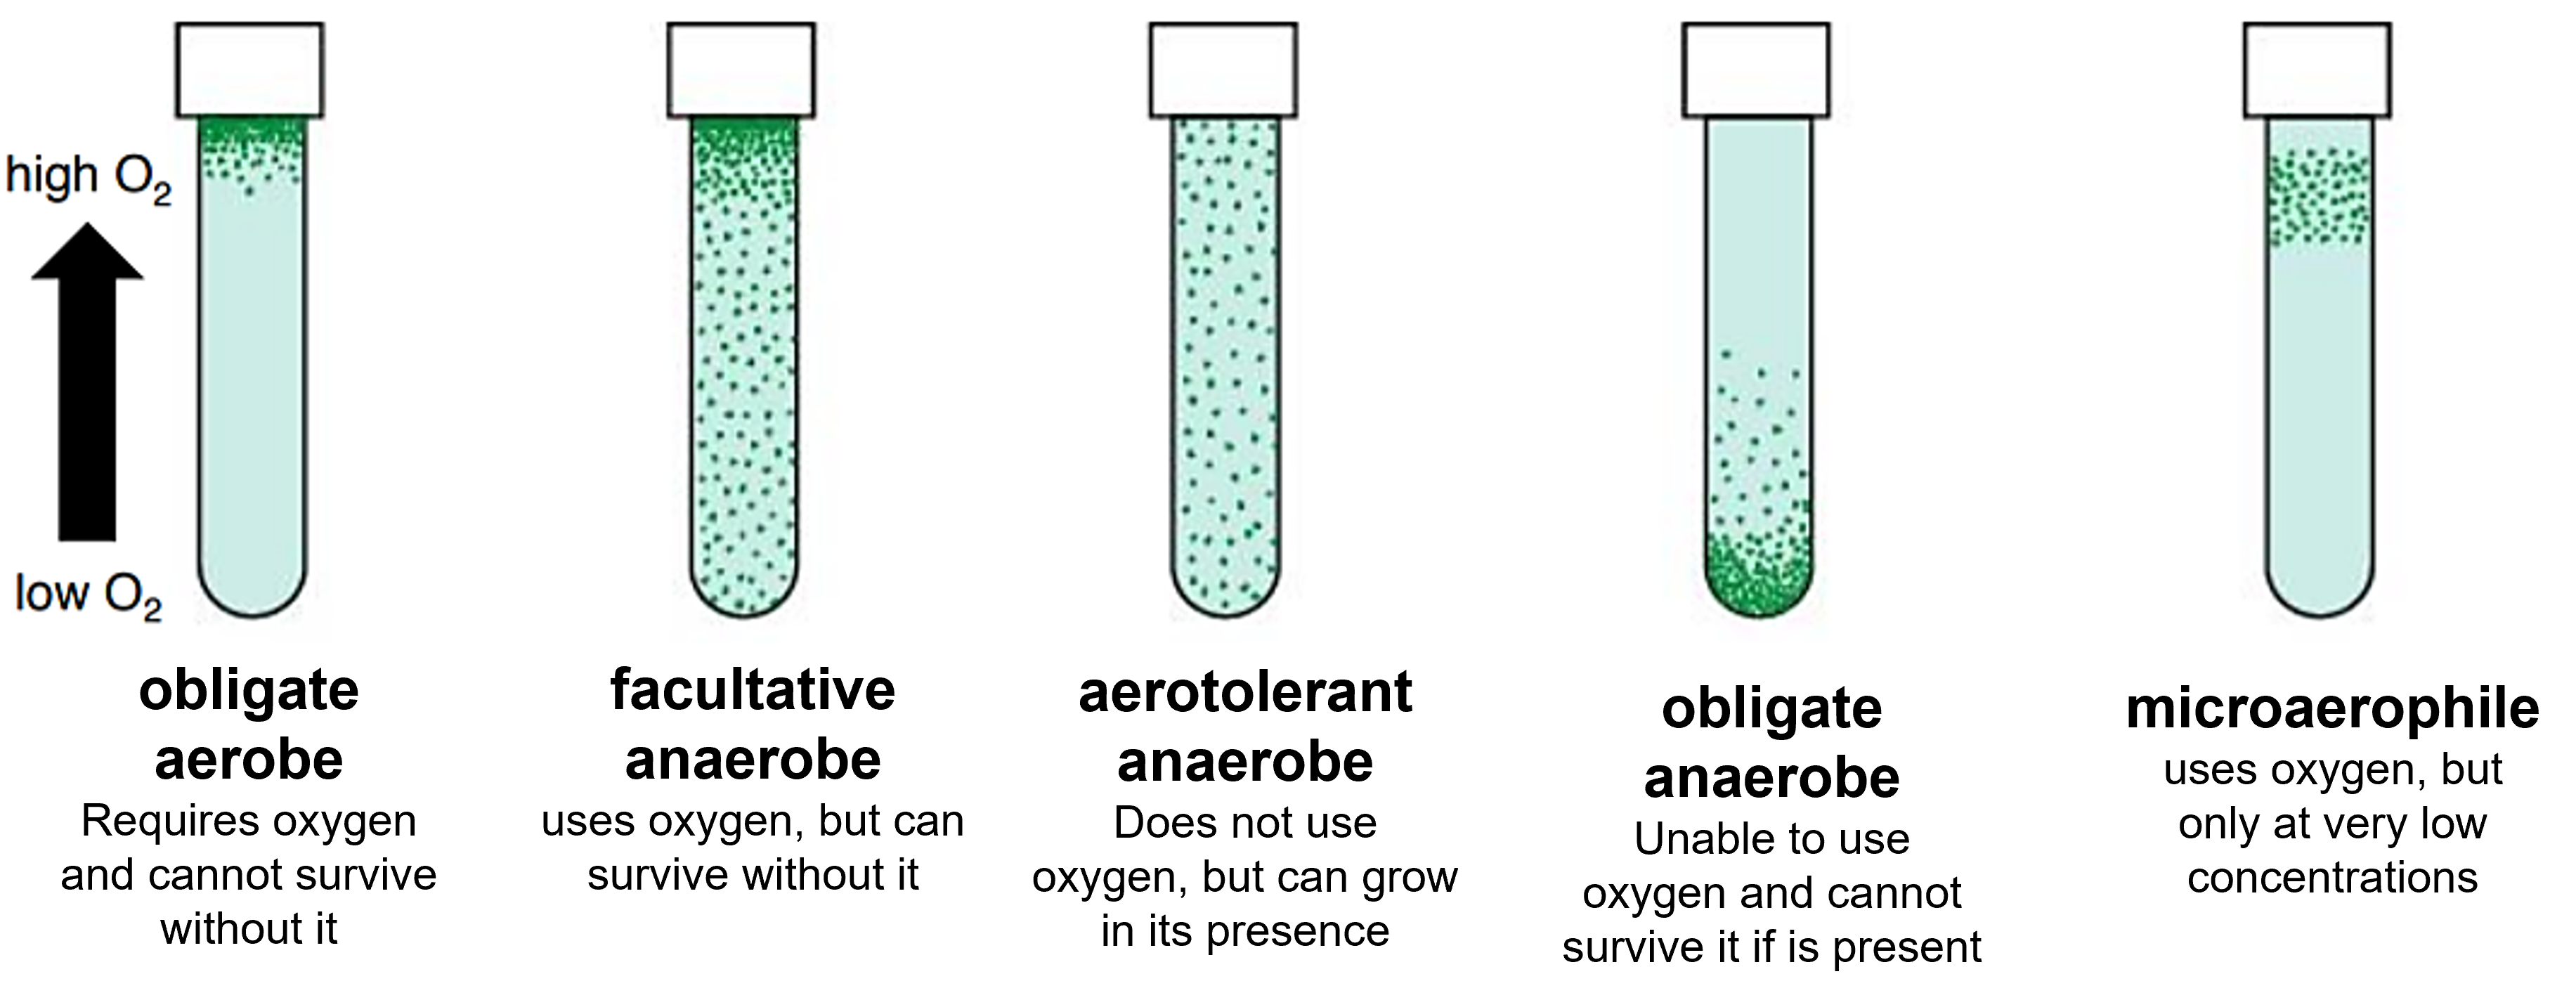 thioglycollate agar determines oxygen requirements; the location of the growth indicates a species oxygen requirements